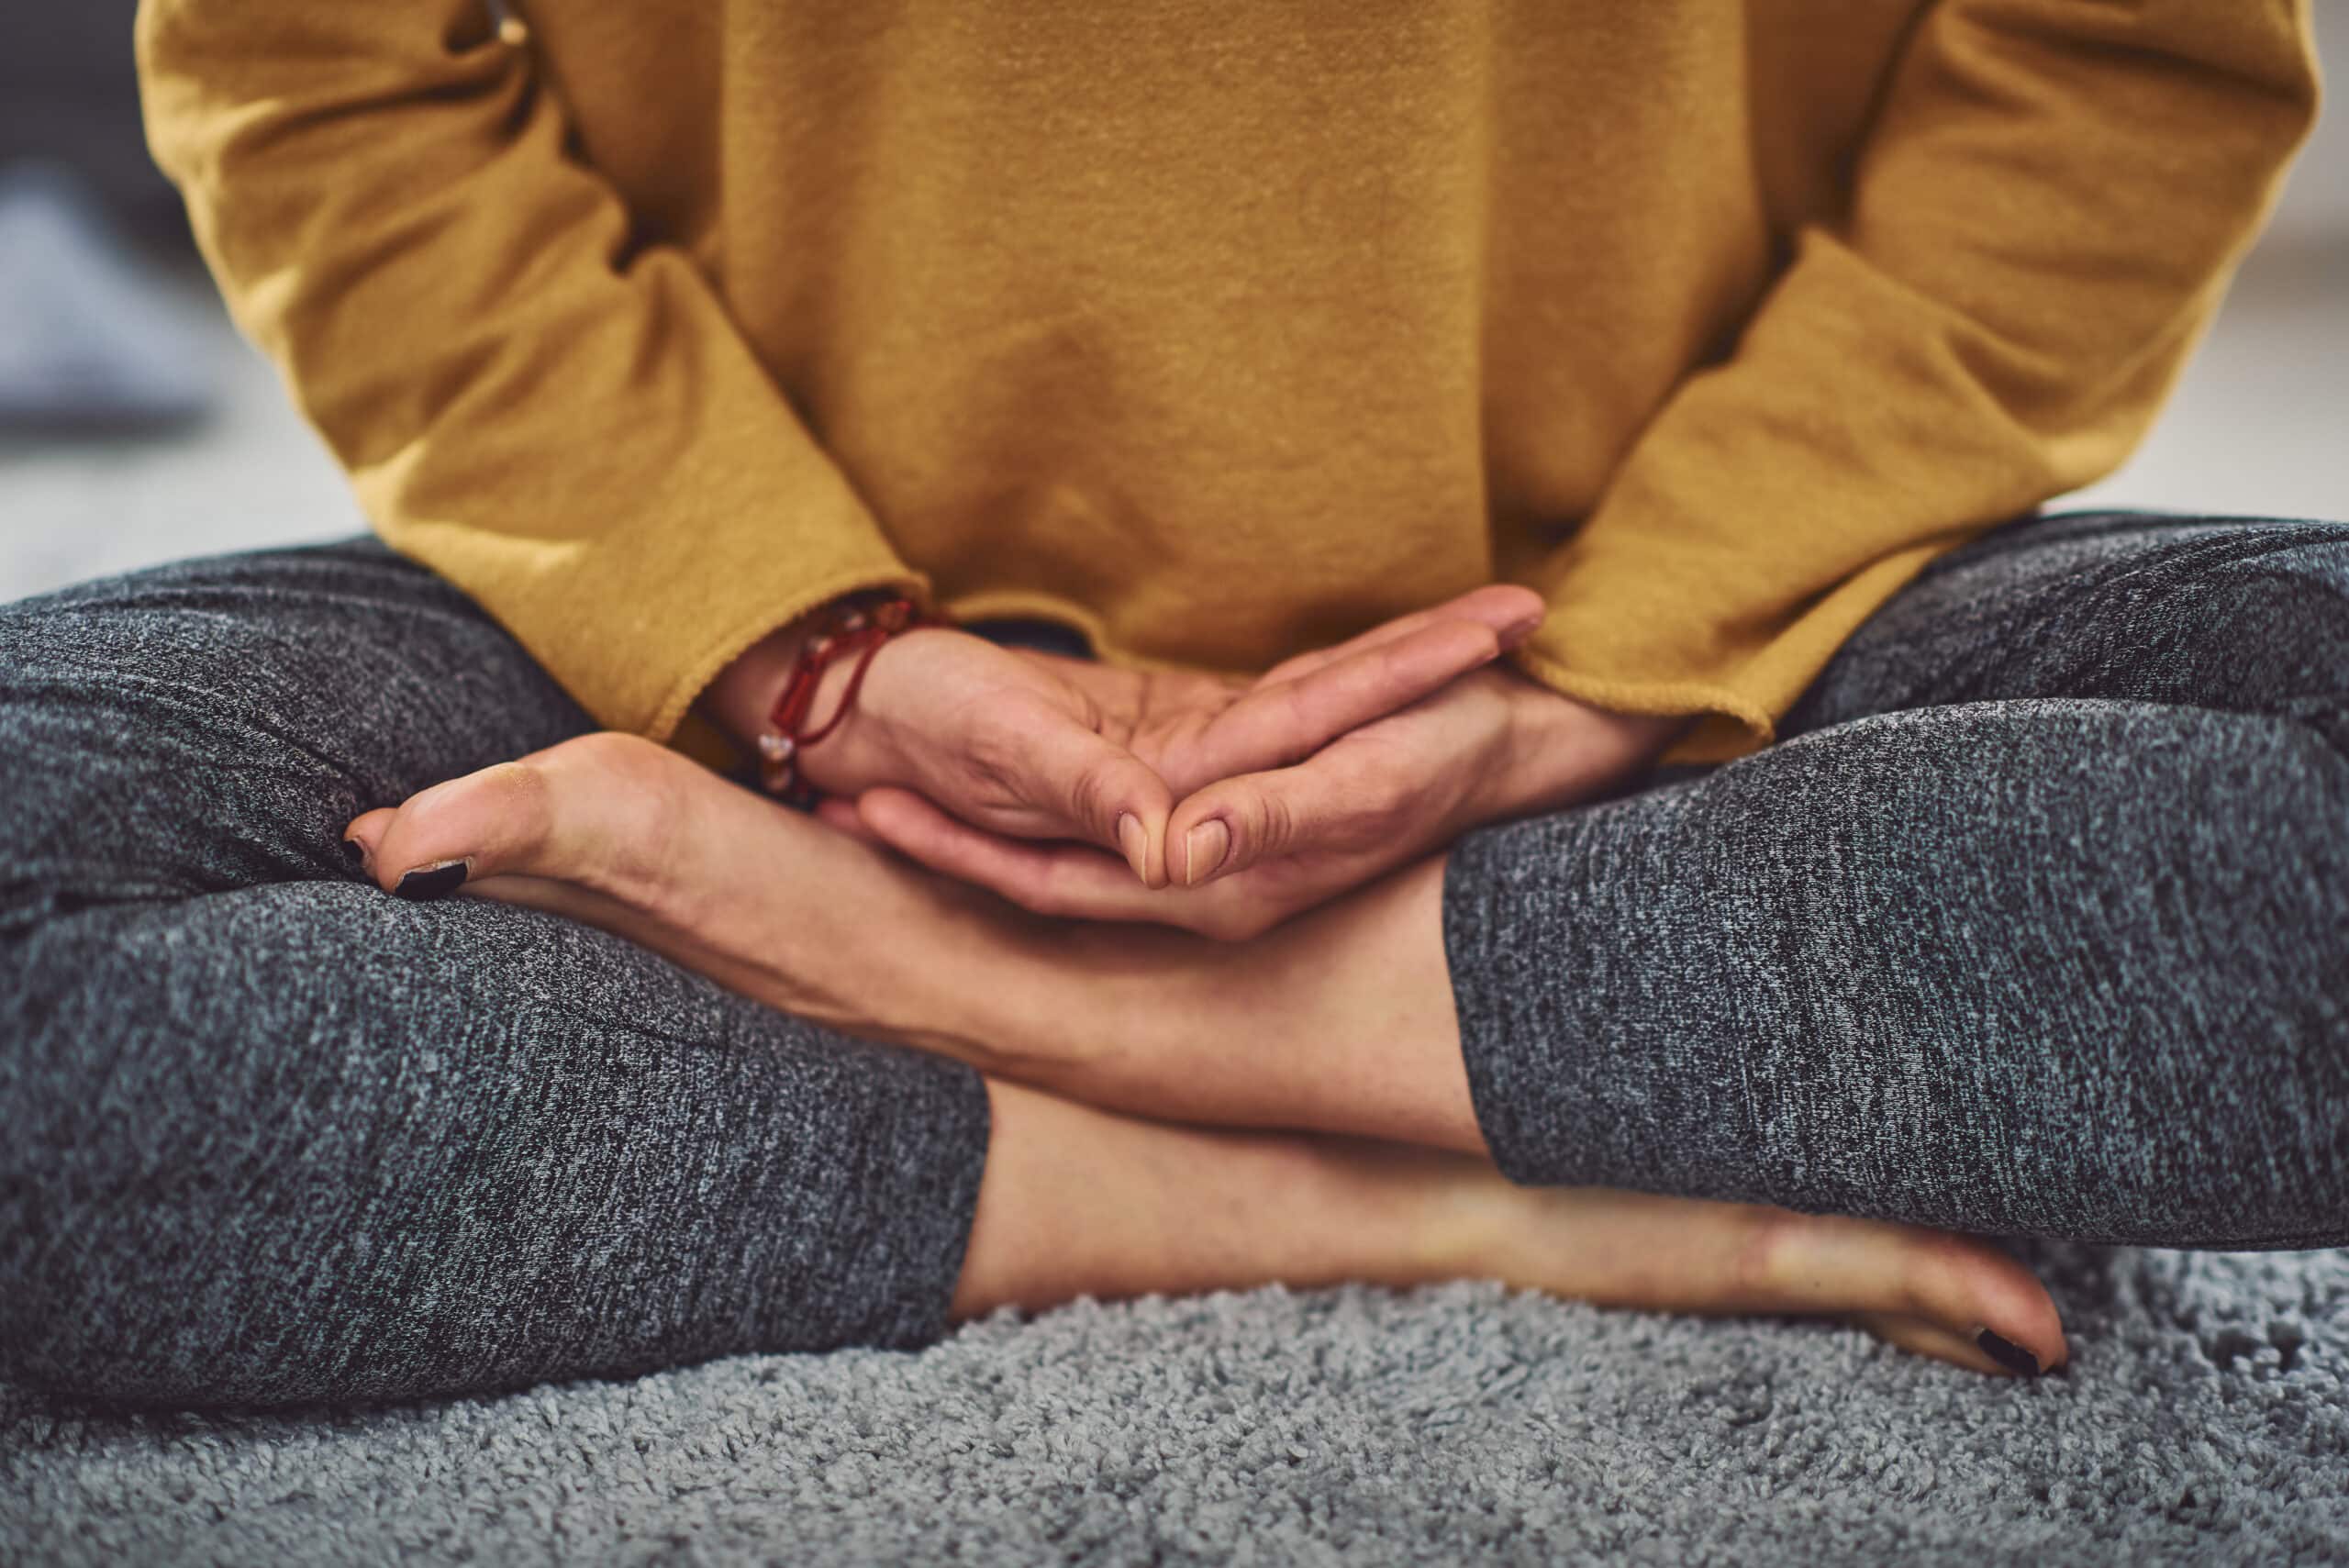 The UAMS Mindfulness Program is offering online courses to the public during October and November that teach introductory skills for meditation and Mindfulness.